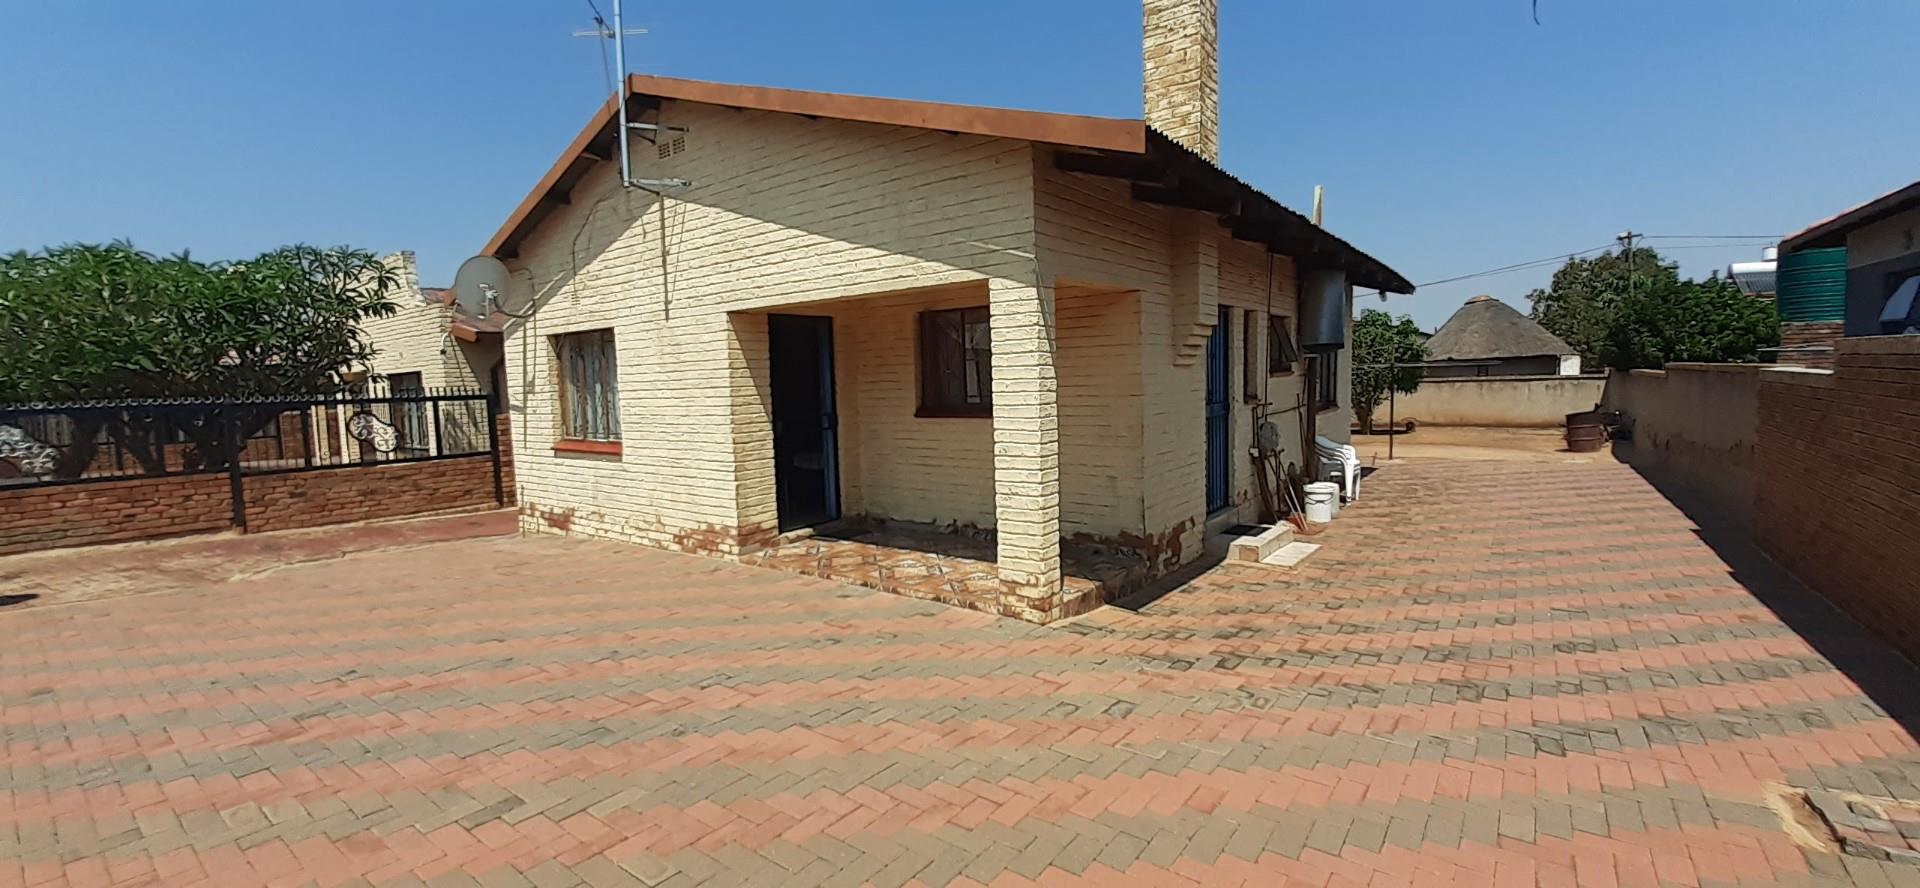 3 Bedroom House for sale in Lebowakgomo Zone A